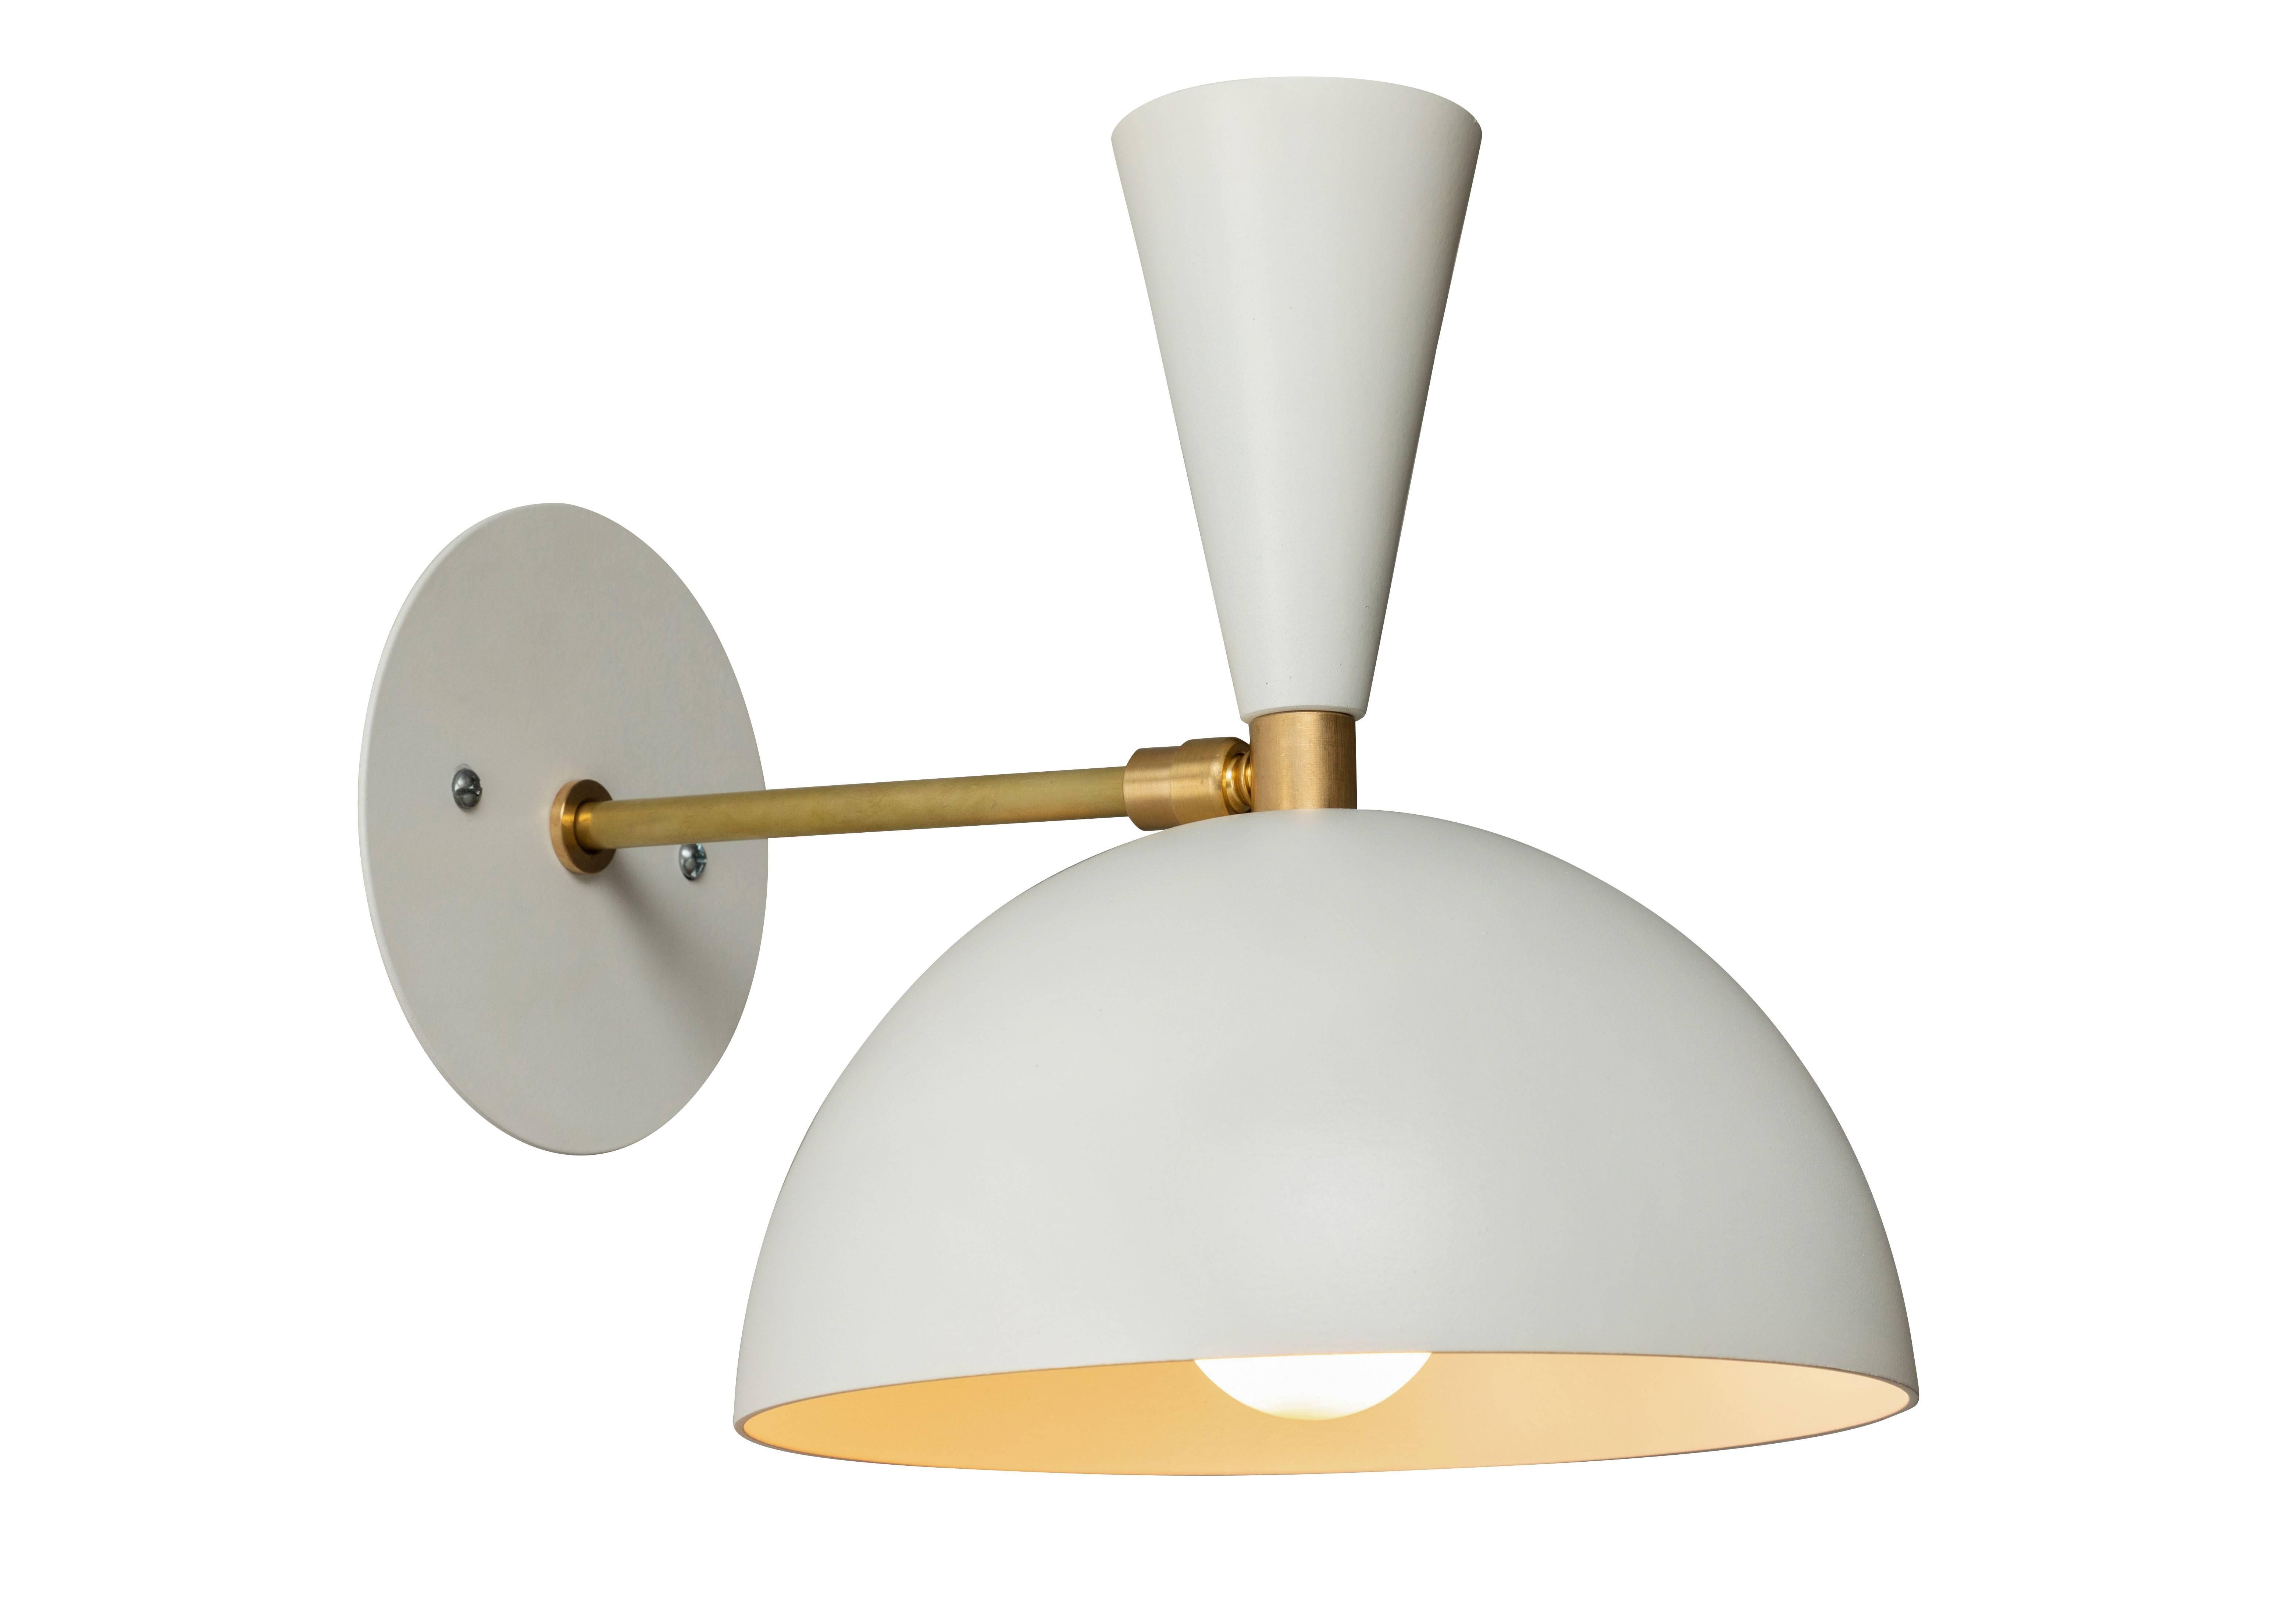 Pair of 'Lola' brass and metal adjustable sconces in white. 

Hand-fabricated by Los Angeles based designer and lighting professional Alvaro Benitez, these highly refined sconces are reminiscent of the iconic midcentury Italian designs of Arteluce